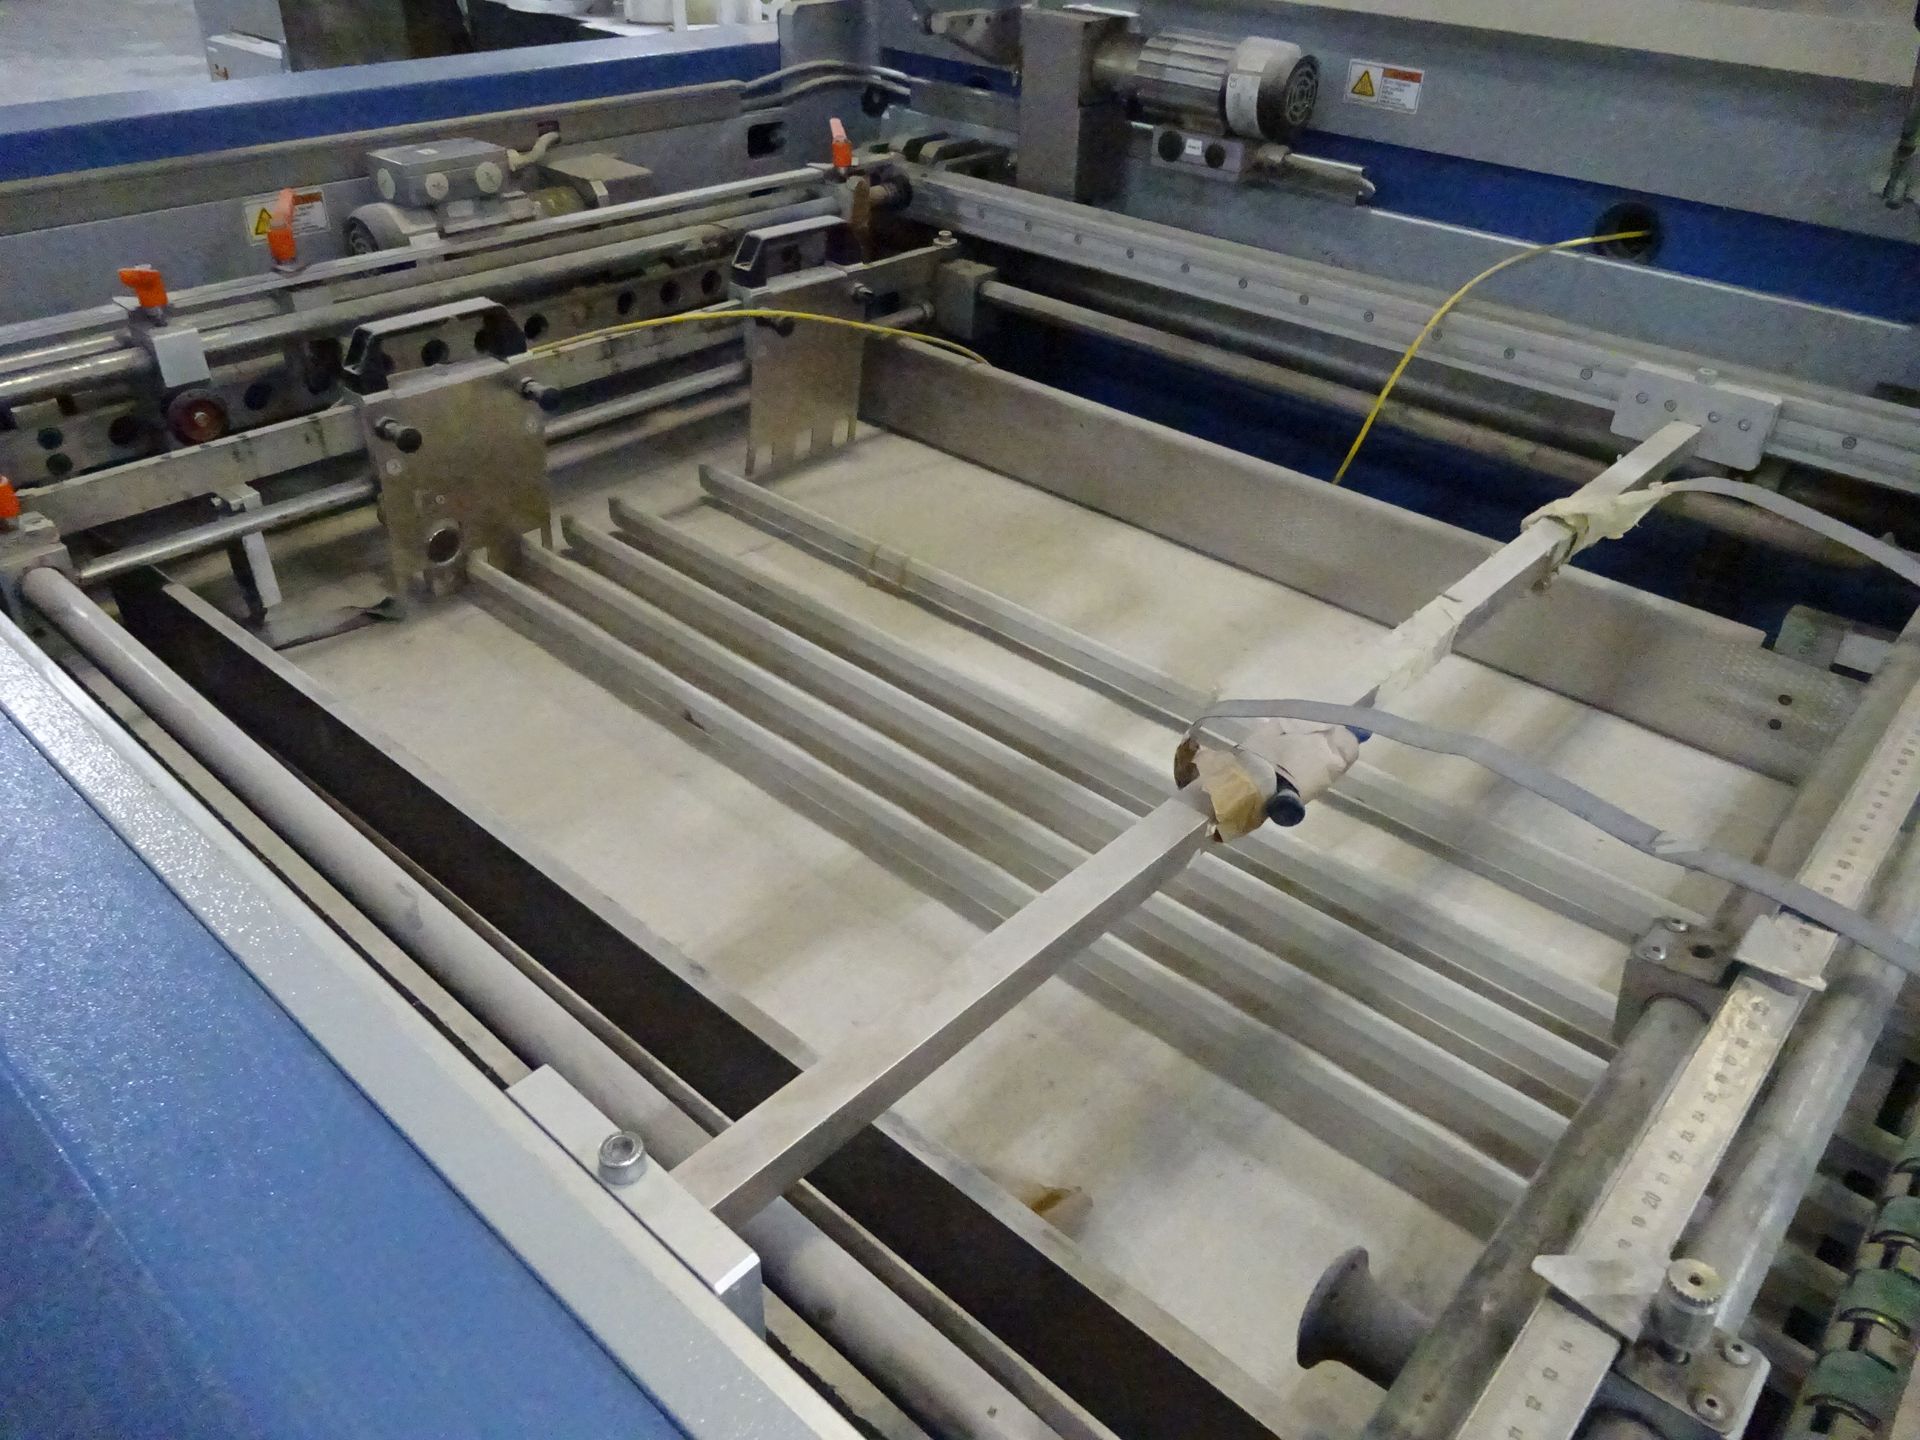 2012 MBO Sheet Stacking Section for Production Ink Jet Printers, Includes: EM770 Ejection Module, - Image 7 of 12